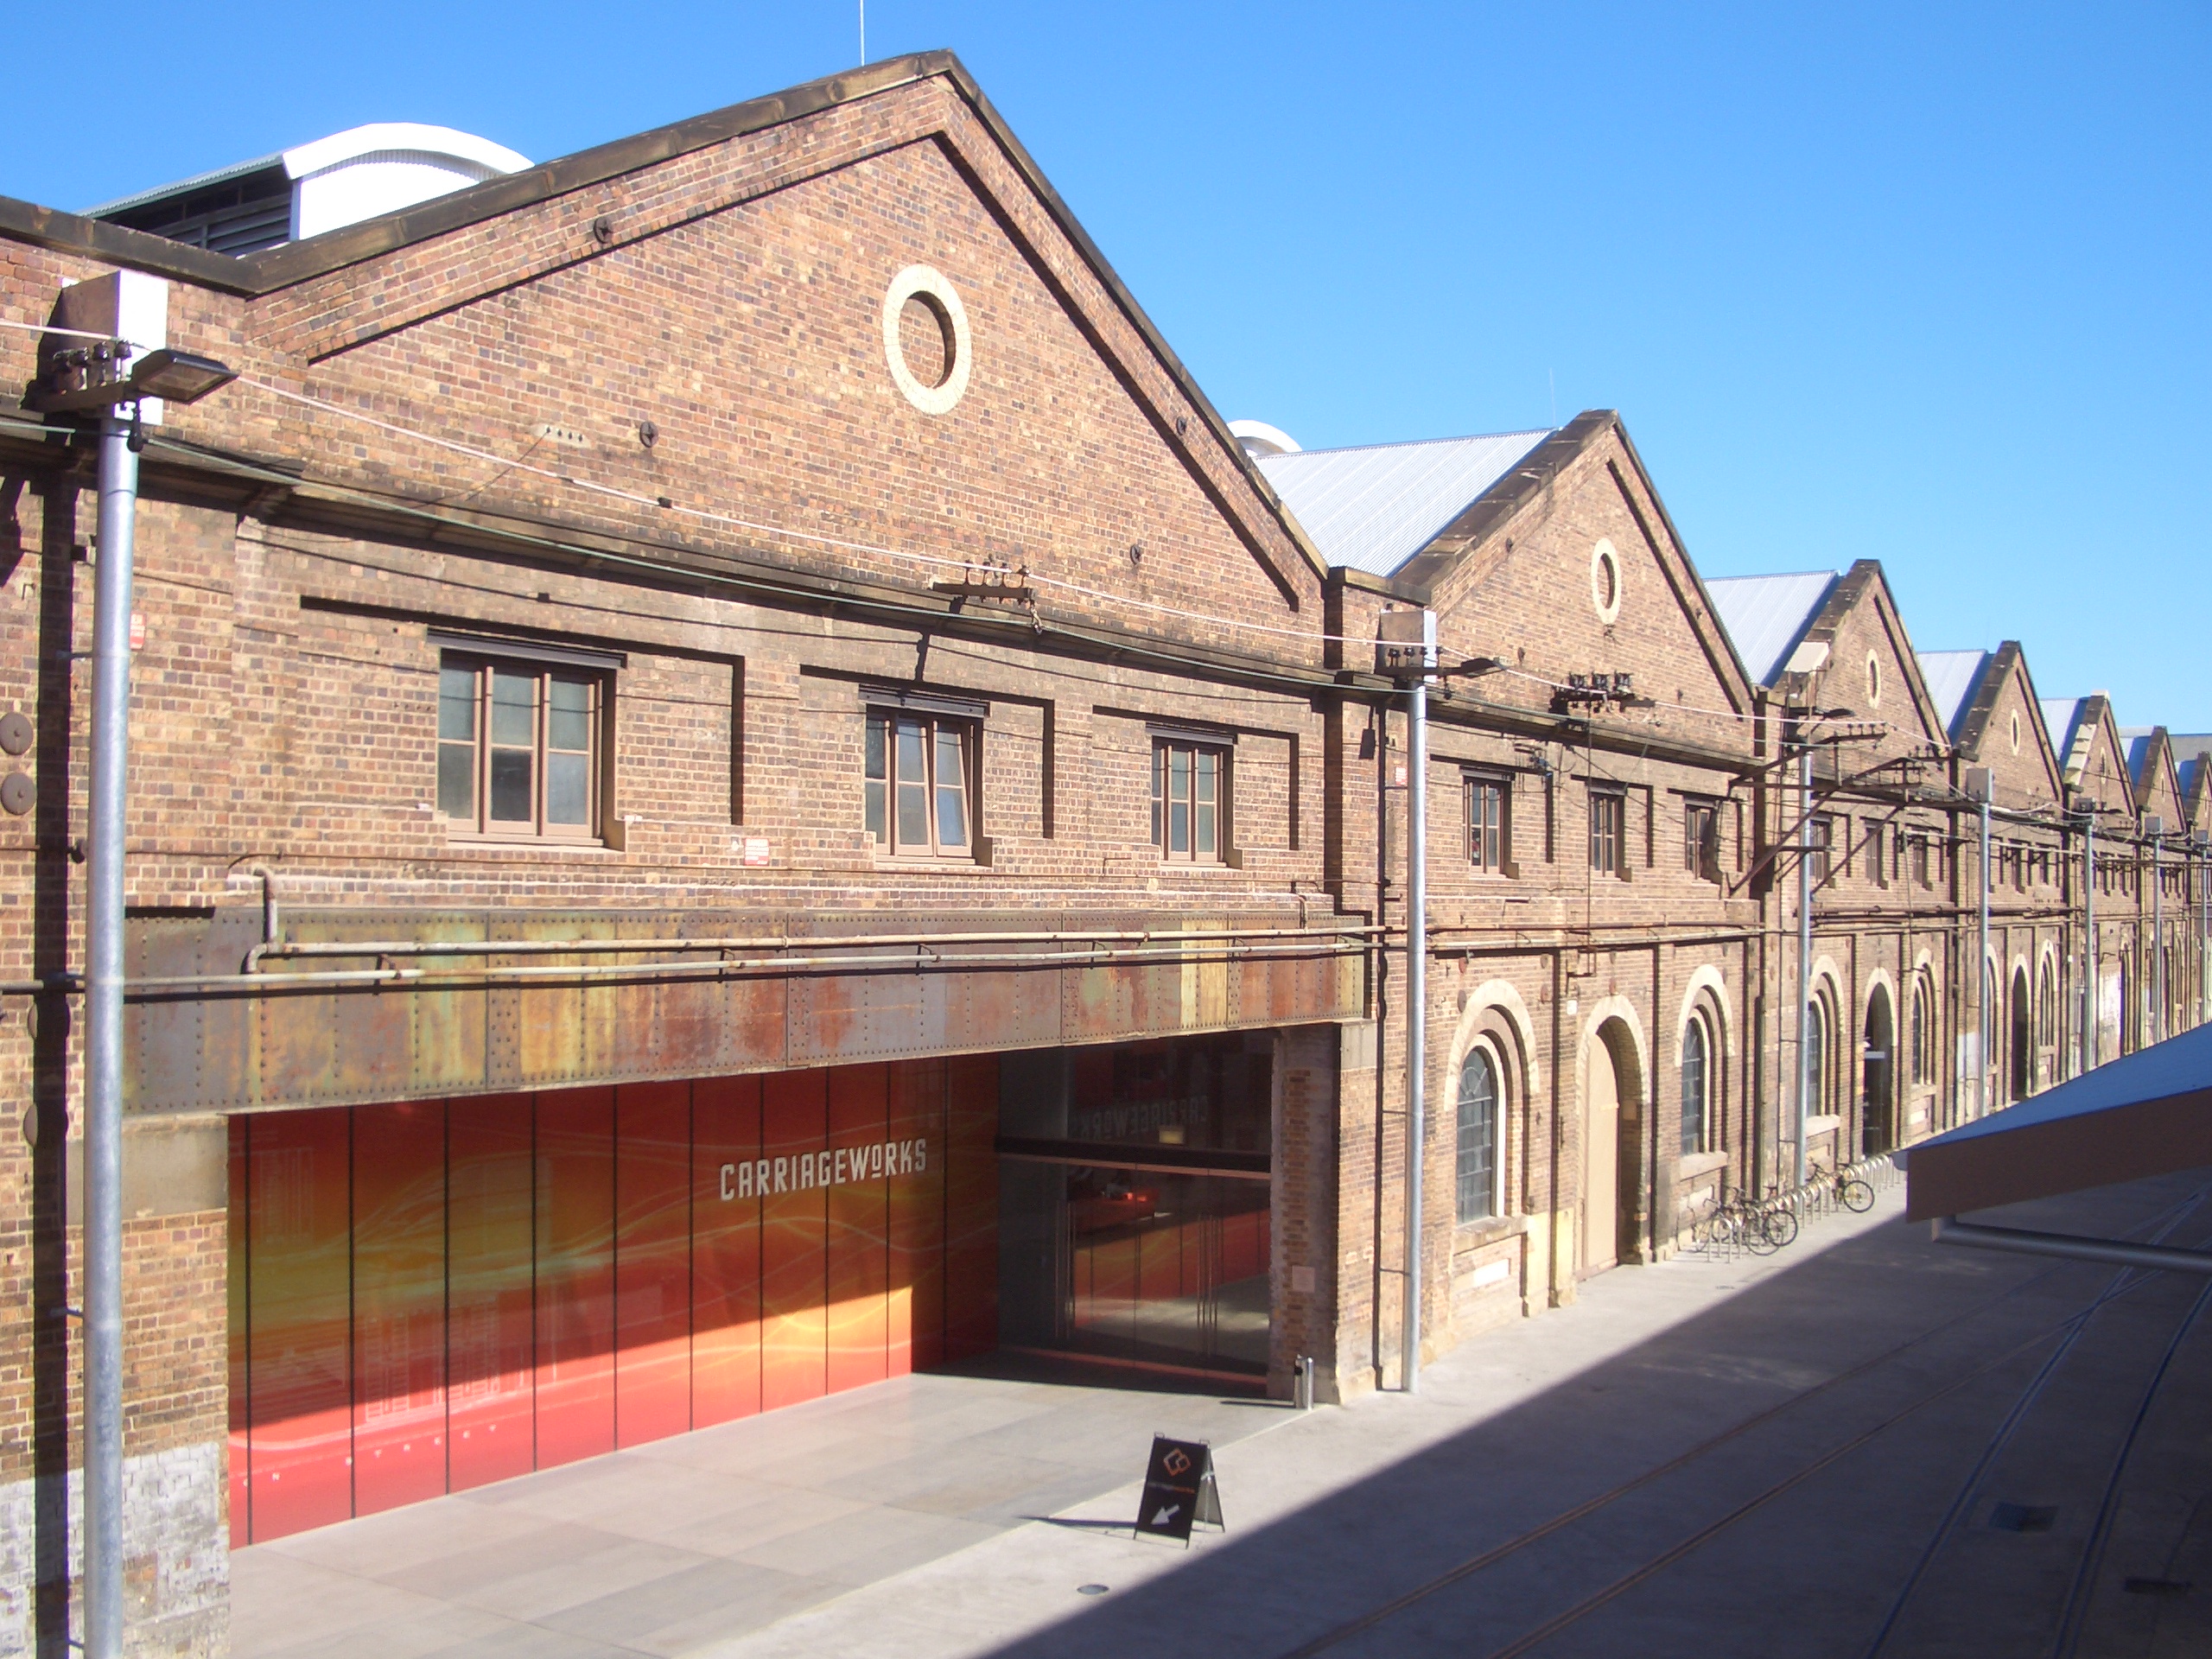 Carriageworks. Image: Wikimedia Commons
